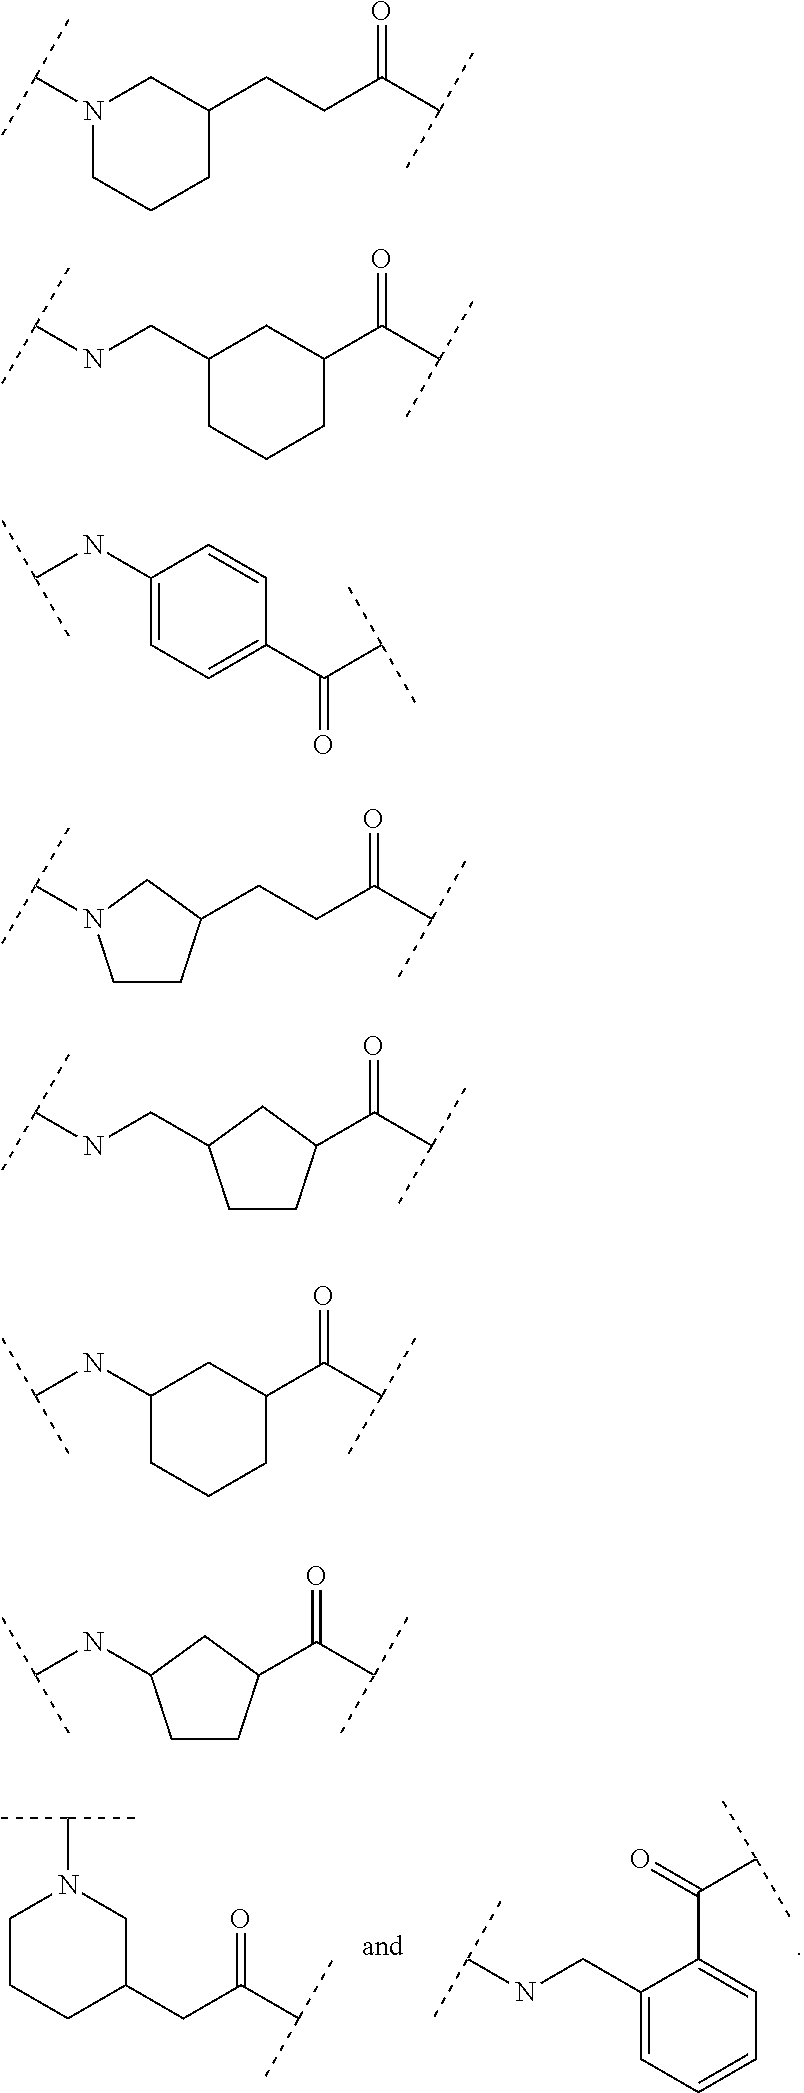 Ghrelin analogues